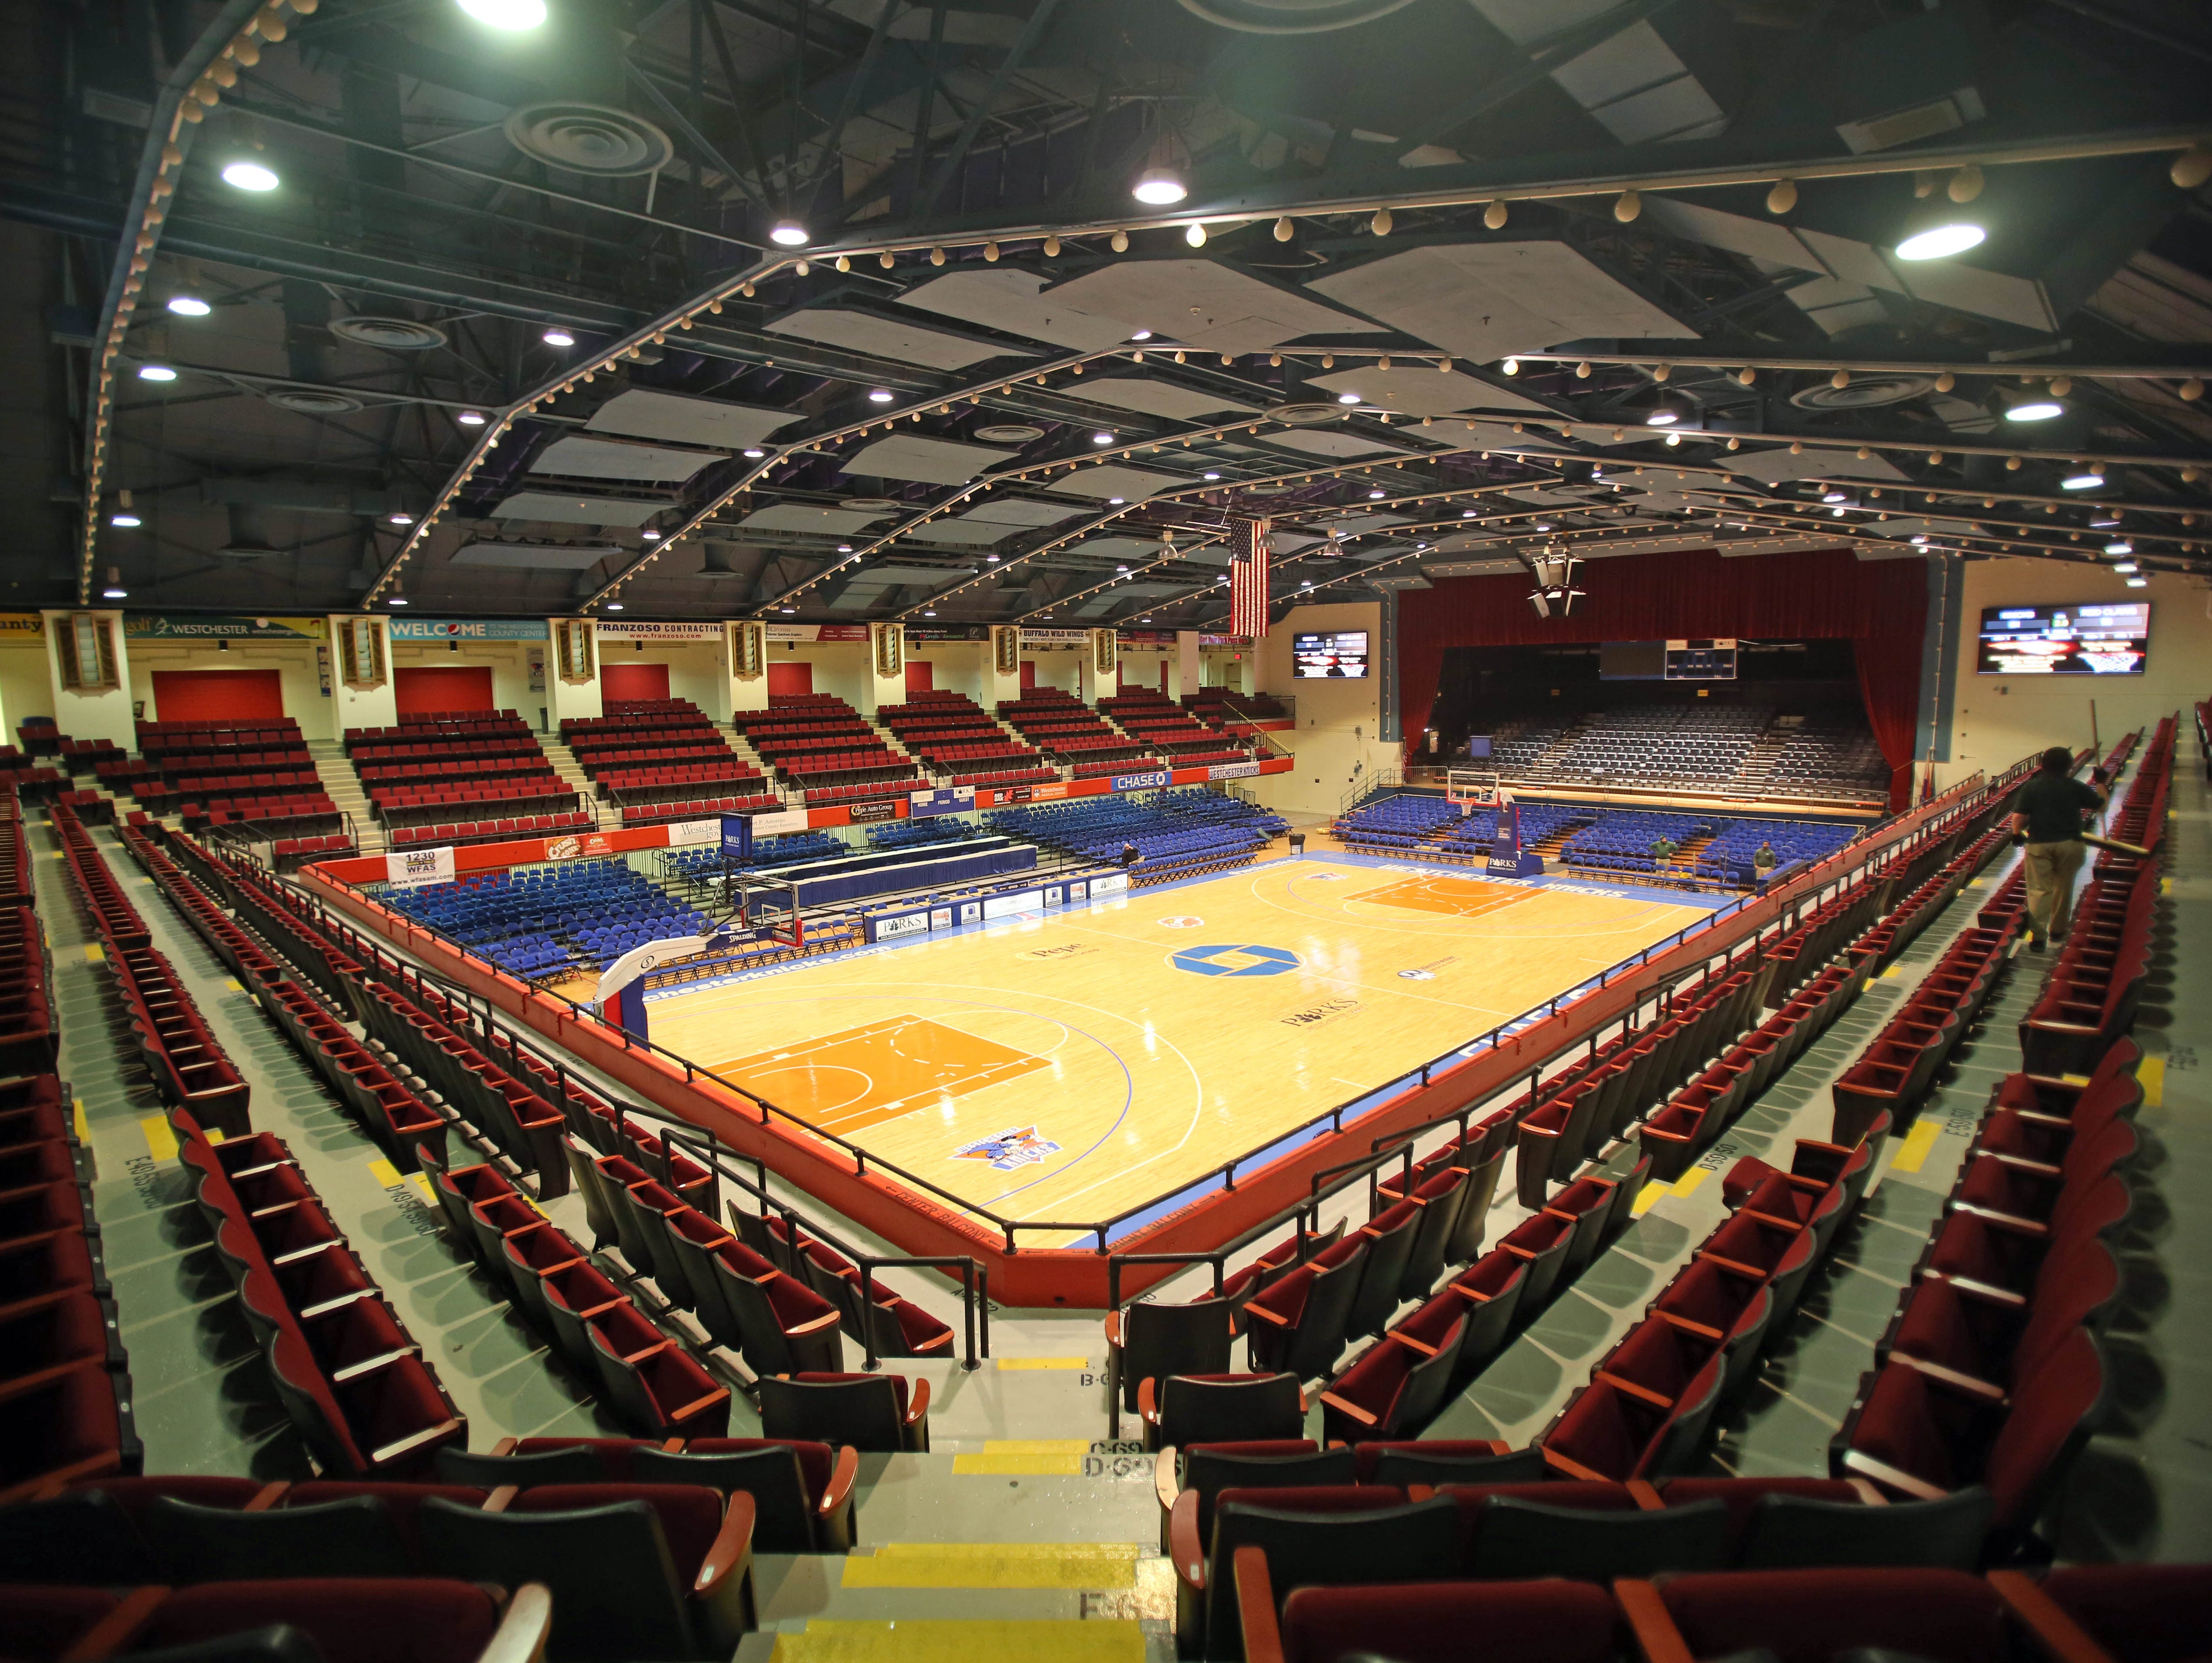 The Westchester County Center will host the Section 1 boys and girls semifinals and finals from Feb. 22-28.